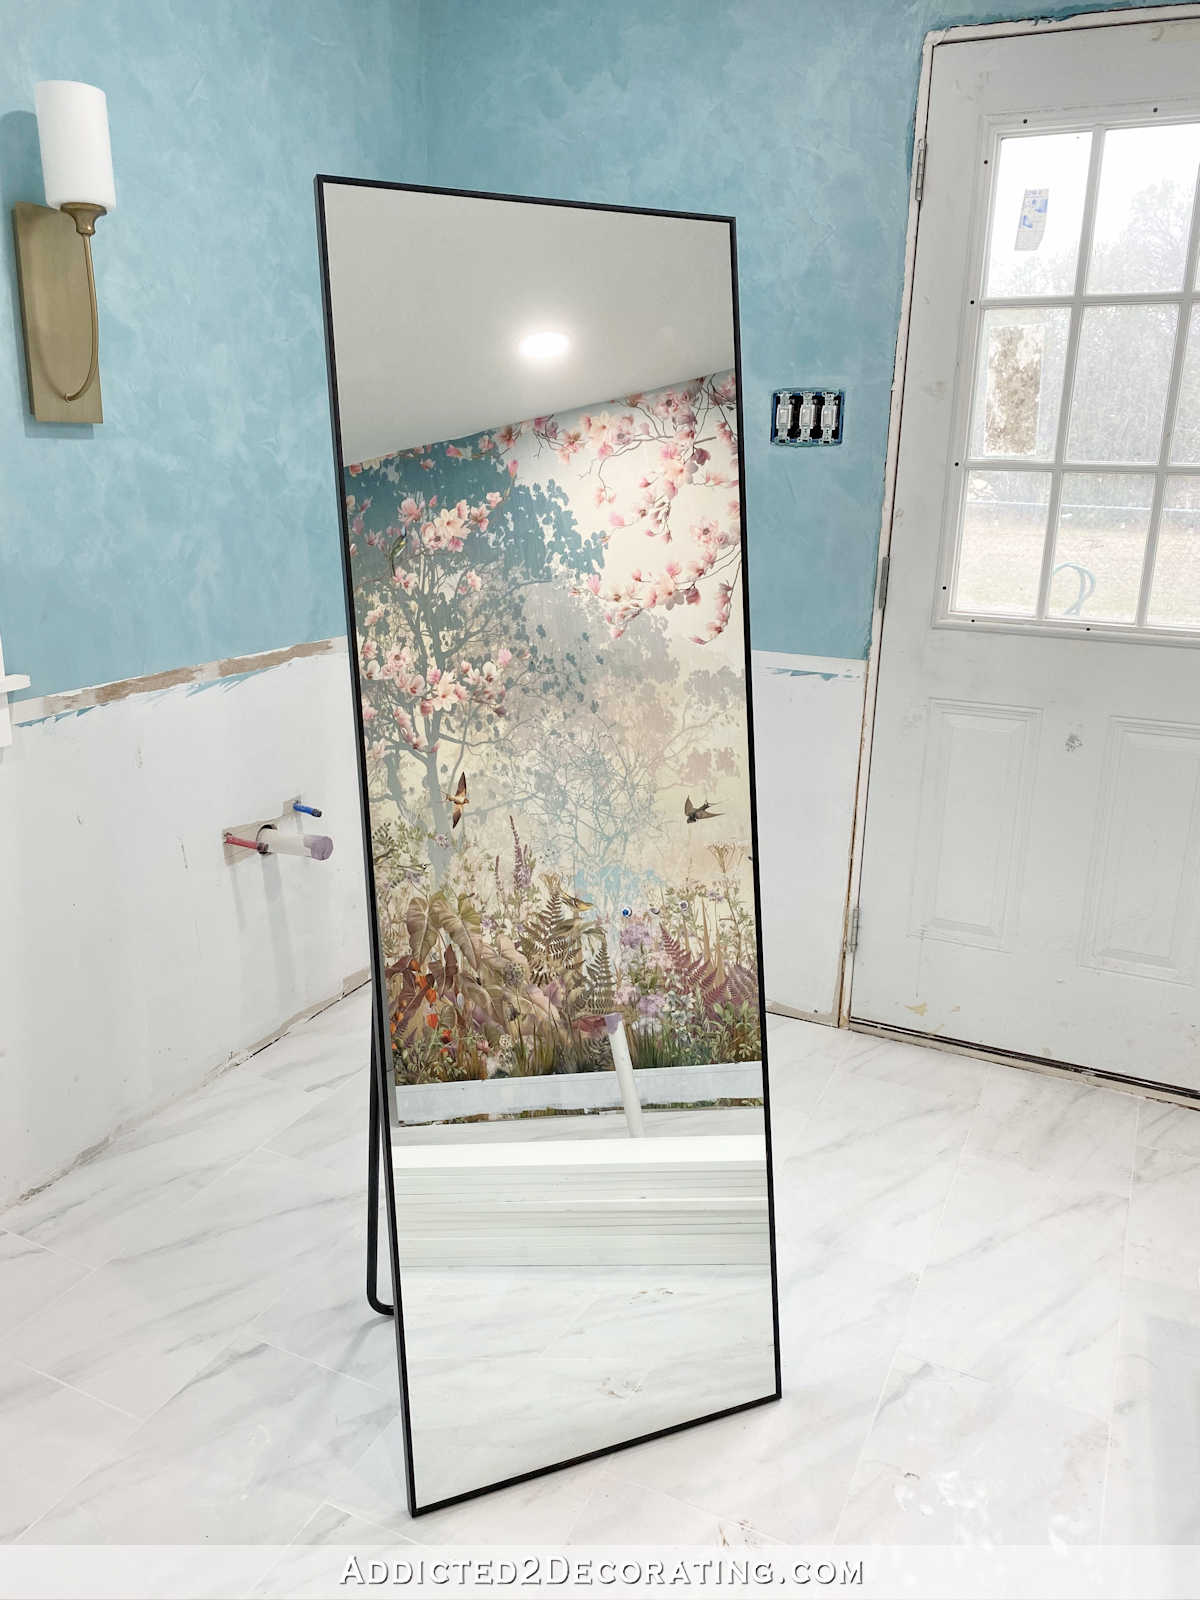 Buying Mirrors Online Is Challenging!